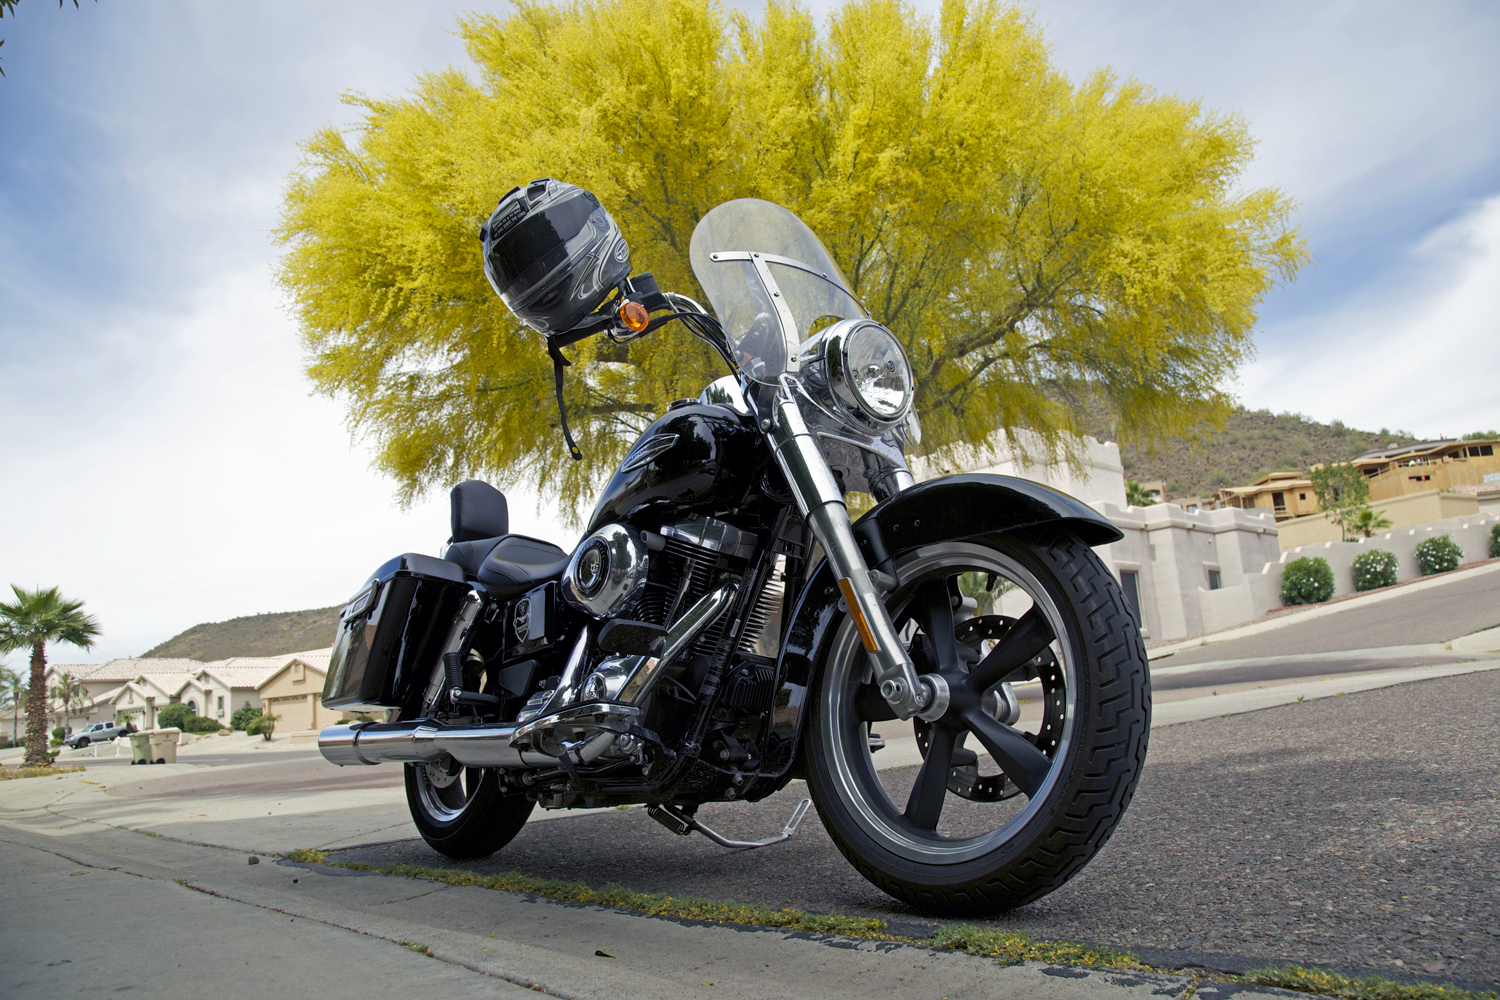 motorcycle-angled-imagery-captured-by-prefocus-branding-photographer-while-in-deer-valley-arizona